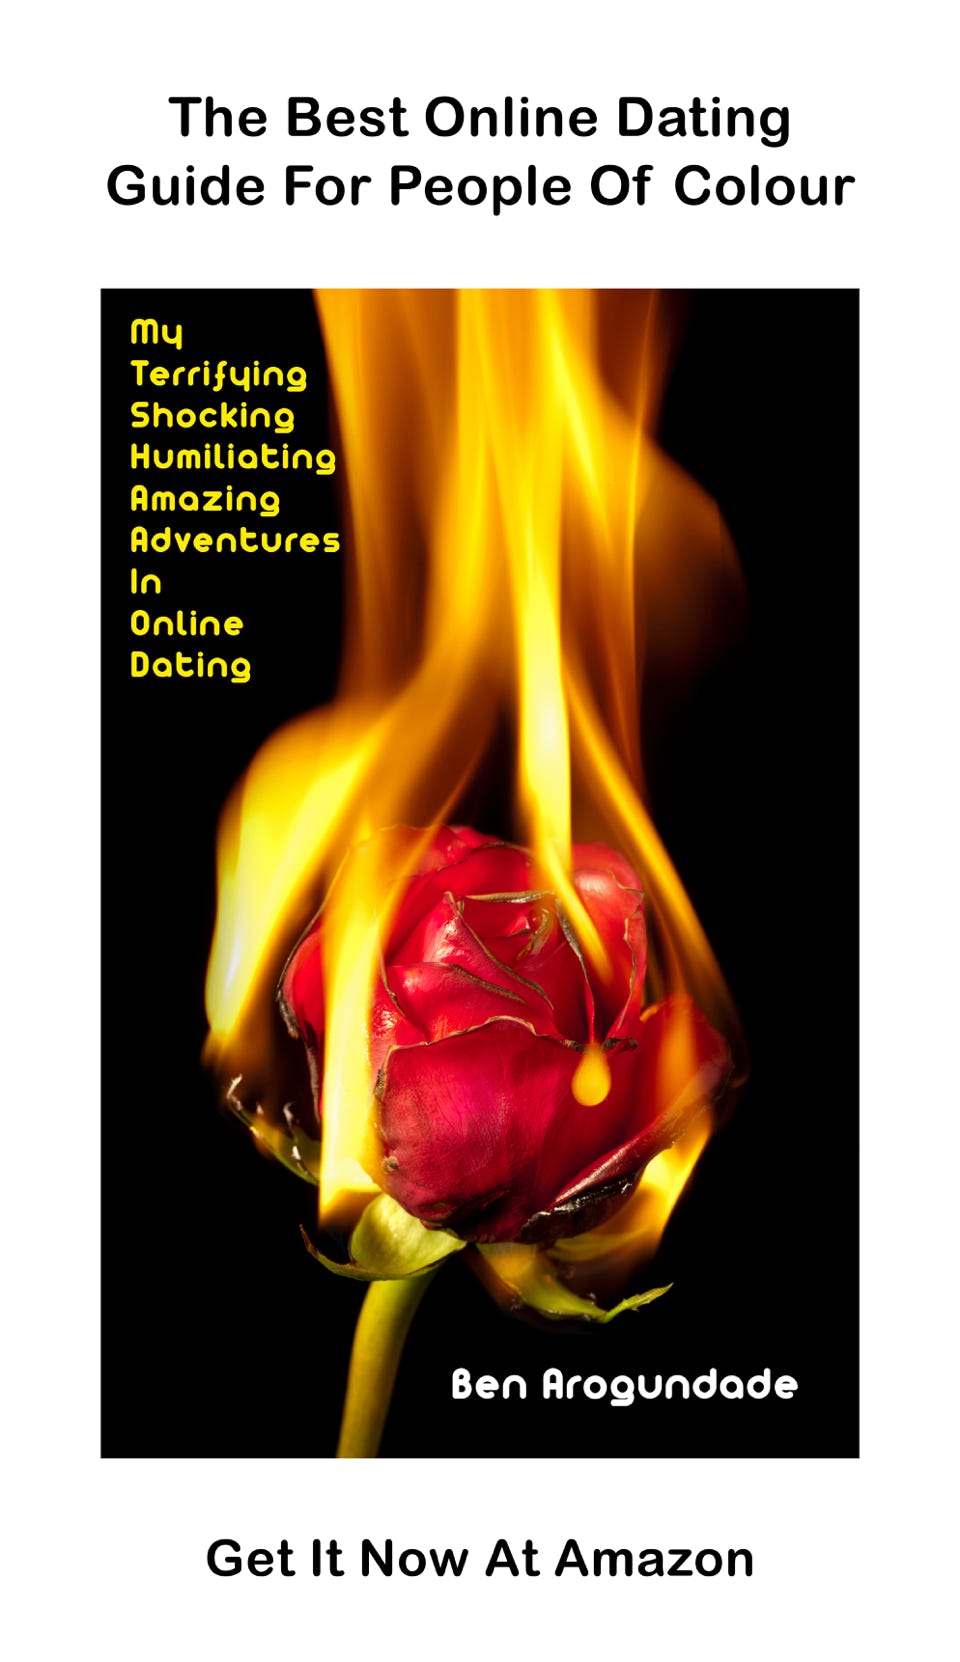 Bestselling new online dating book 2023